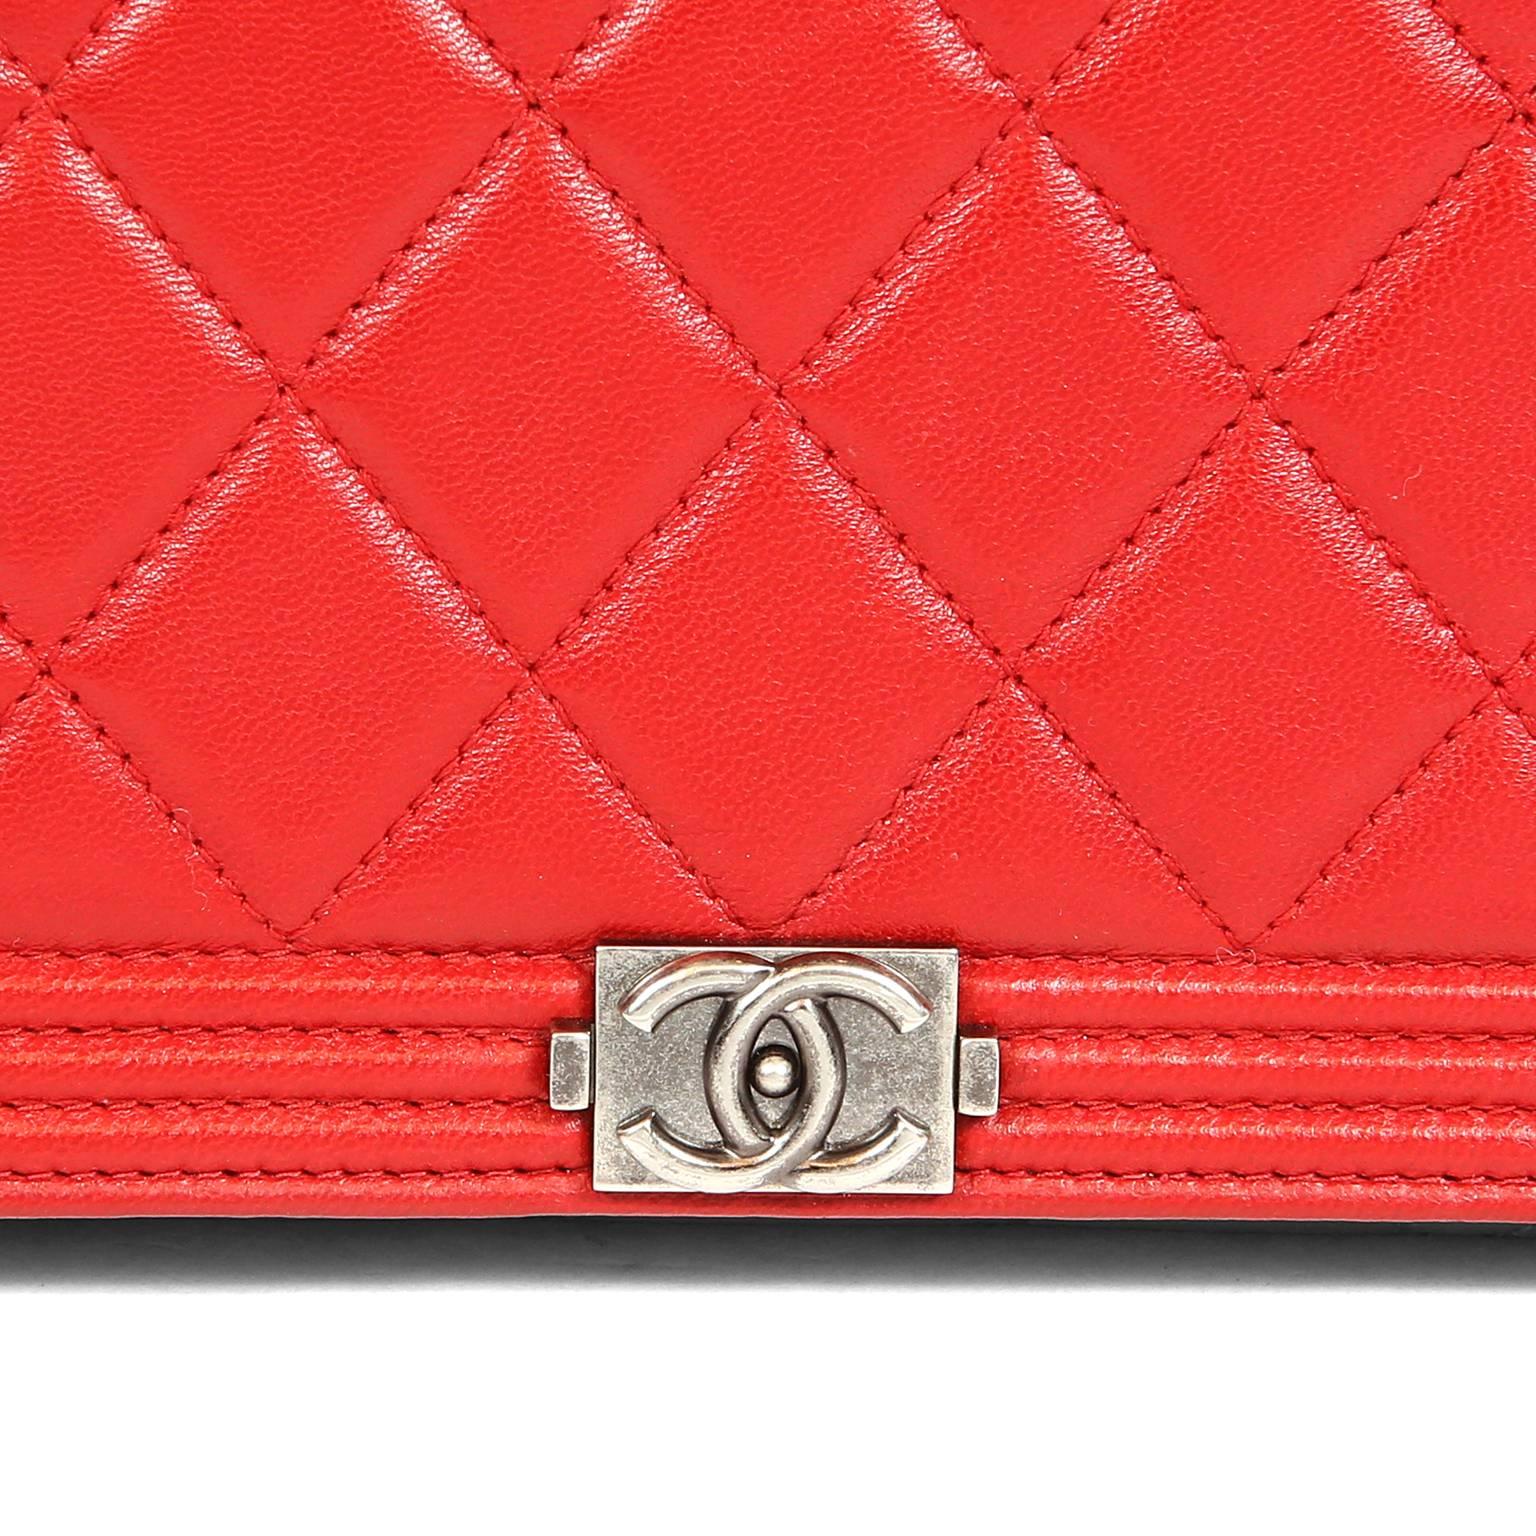 Chanel Red Leather Boy Bag Clutch with Chain 2